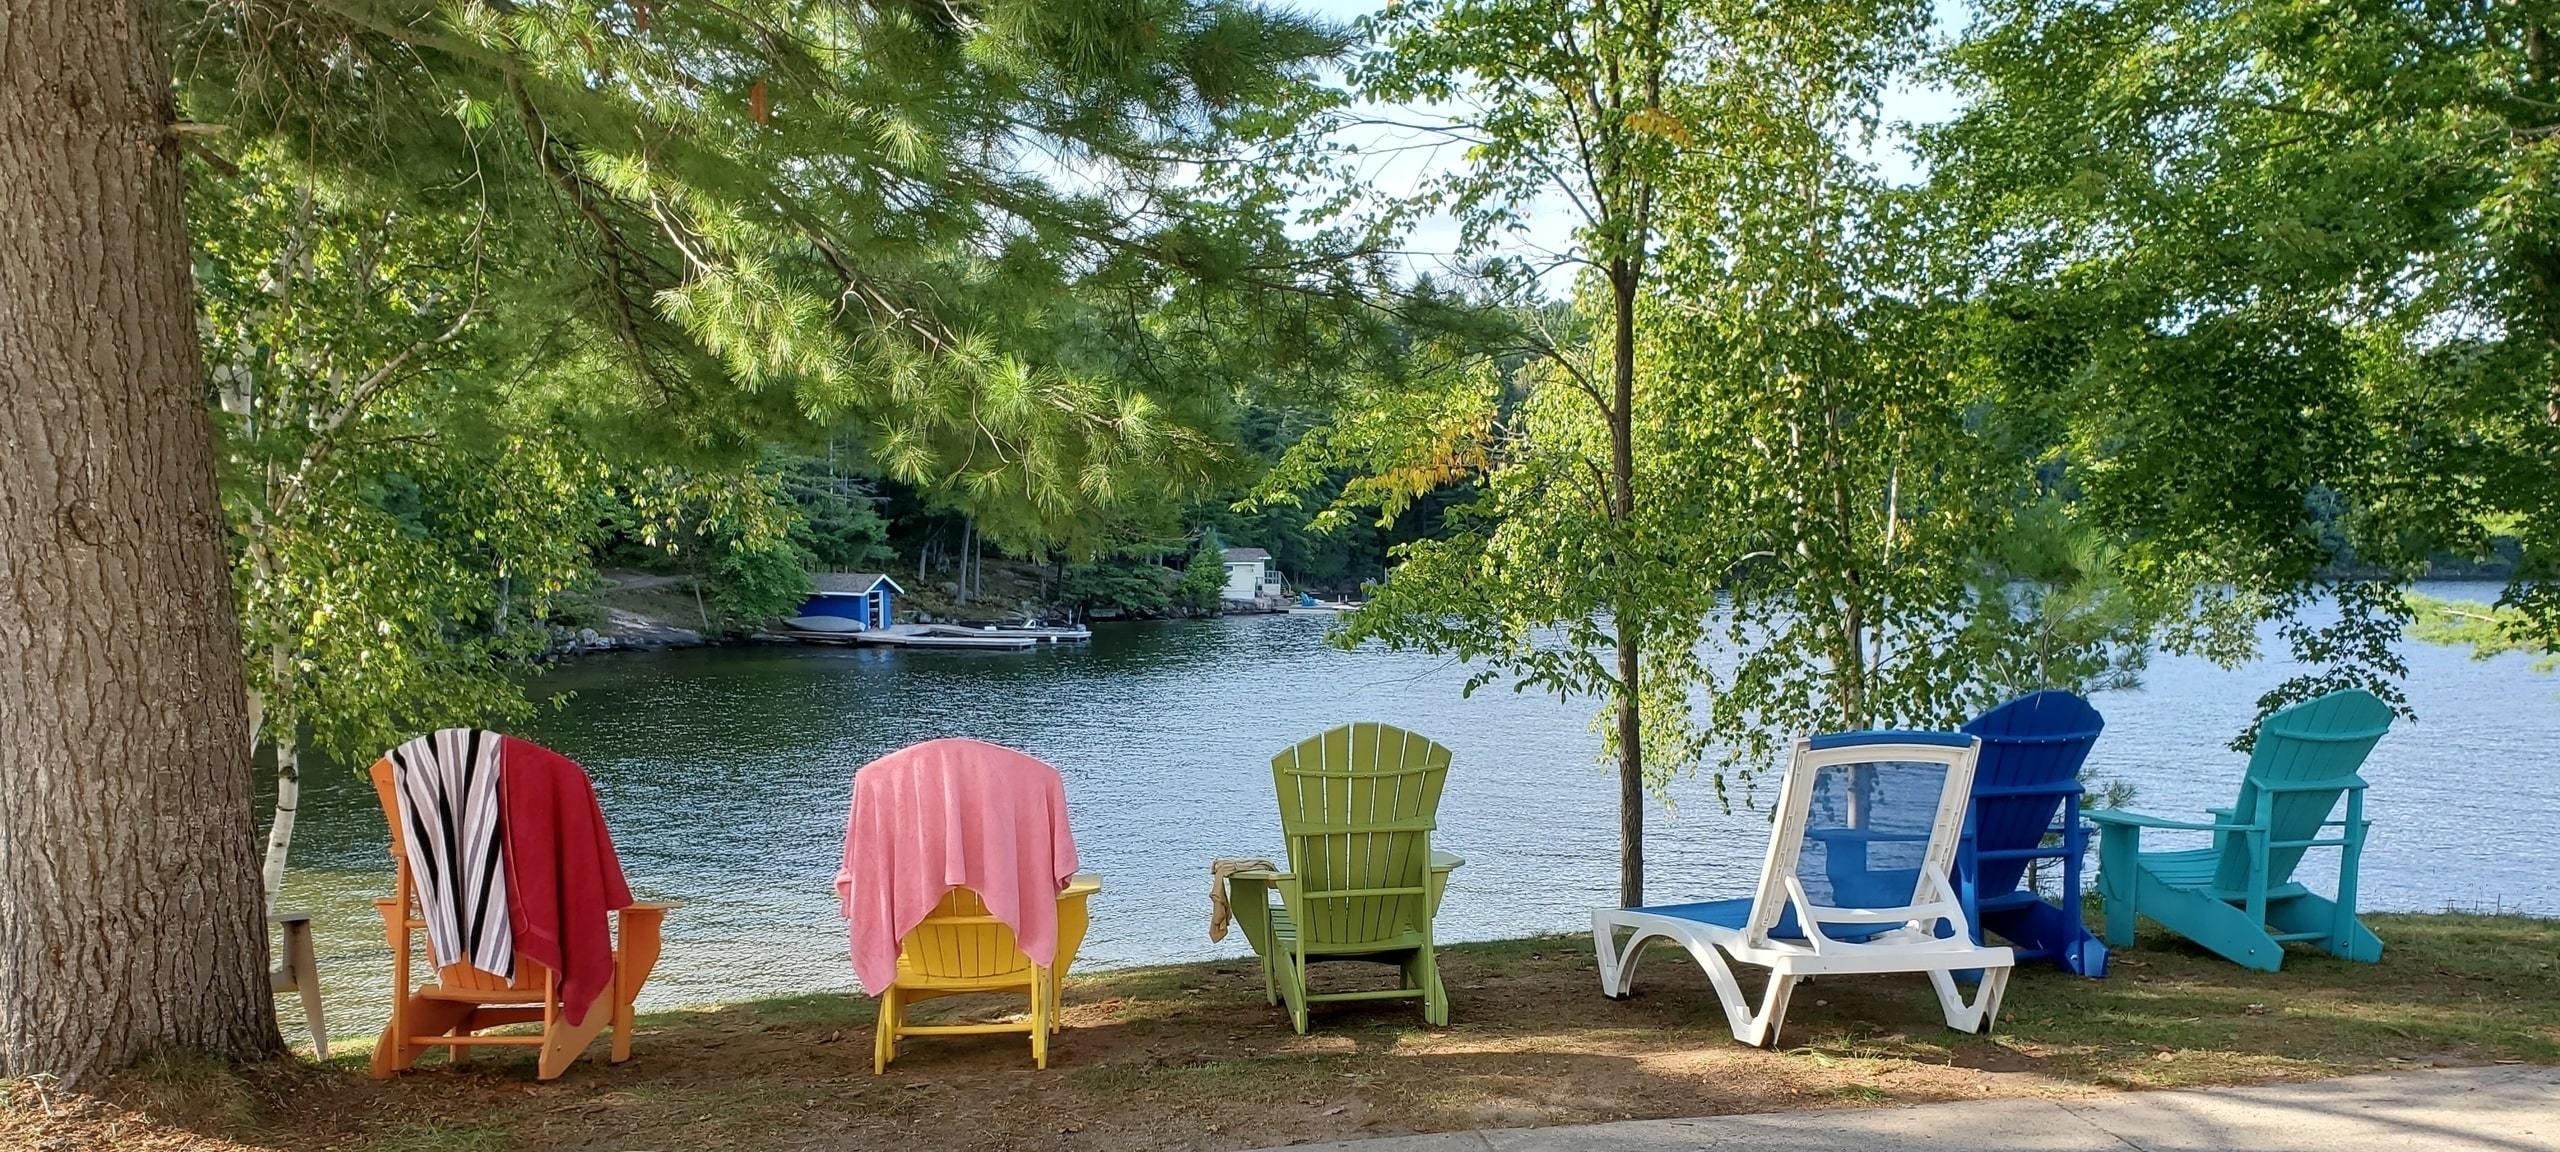 Colourful Muskoka chairs lined up overlooking the lake